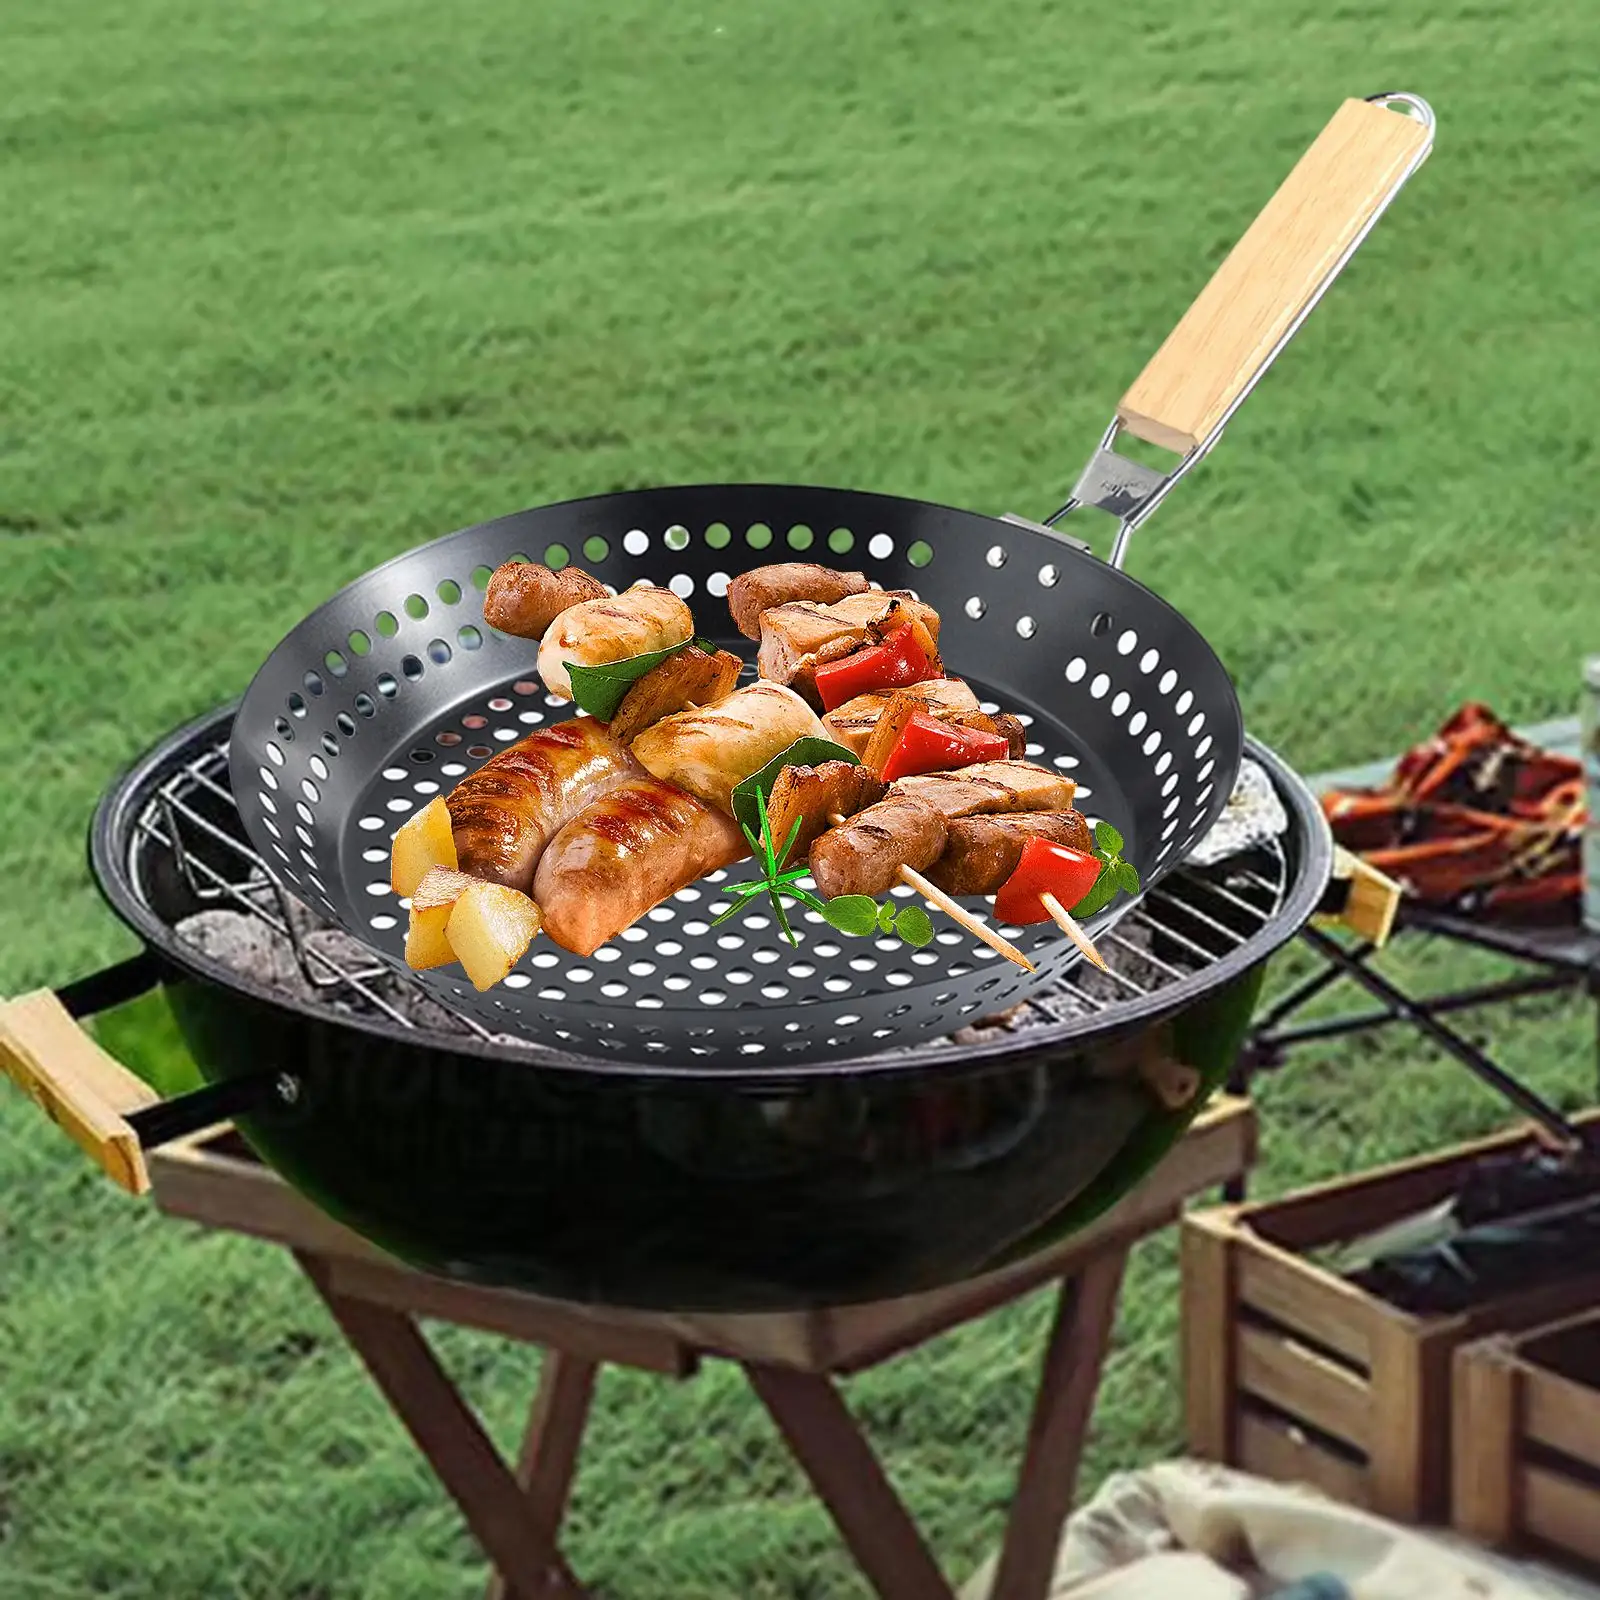 Bakeware Grill Pan Frying Pan Folding Handle Cooking Pan Barbecue Grilling Plate for Hiking Kitchen Baking Travel Backpacking